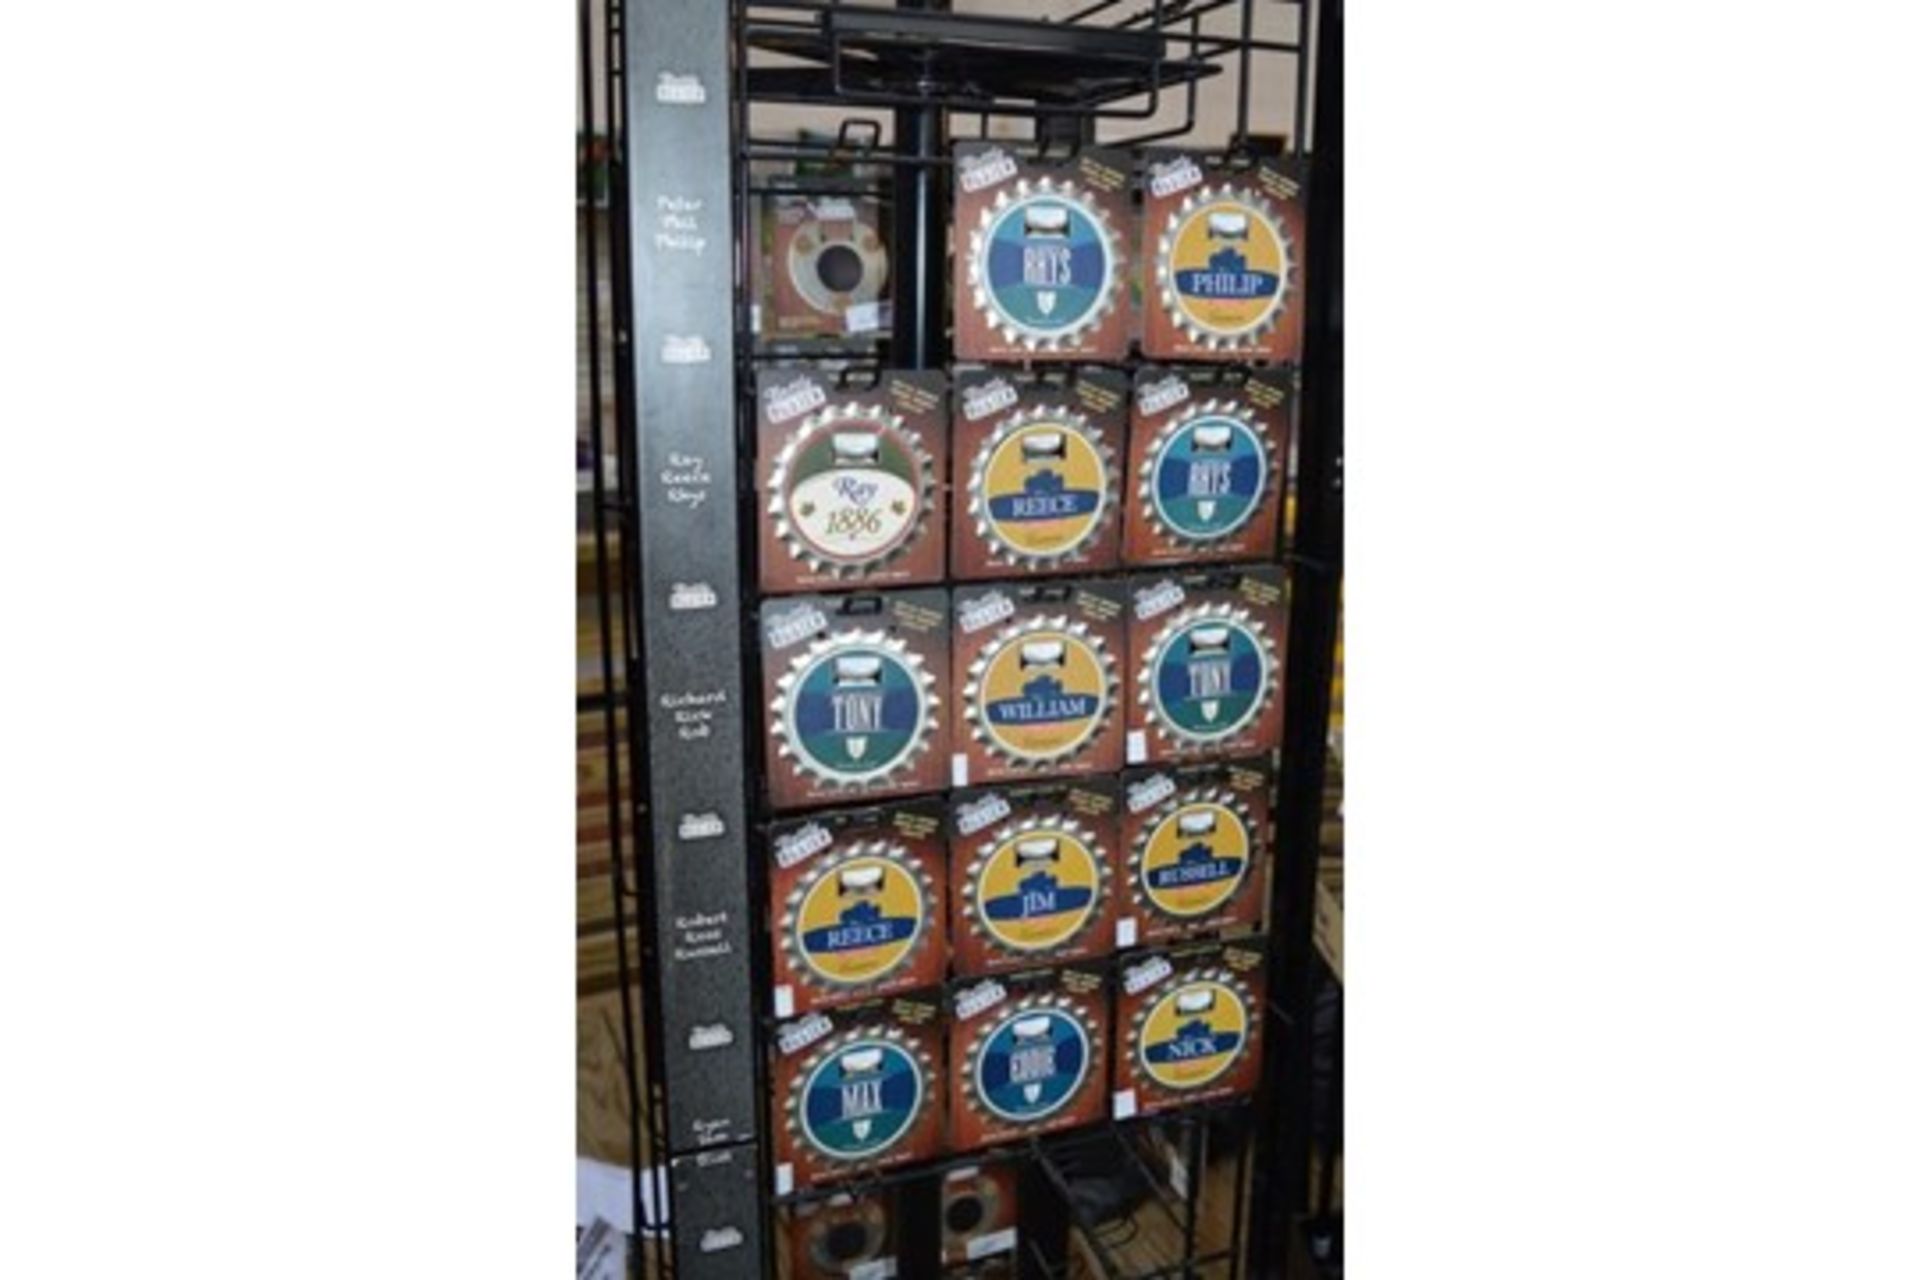 27 x Retail Carousel Display Stands With Approximately 2,800 Items of Resale Stock - Includes - Image 7 of 61